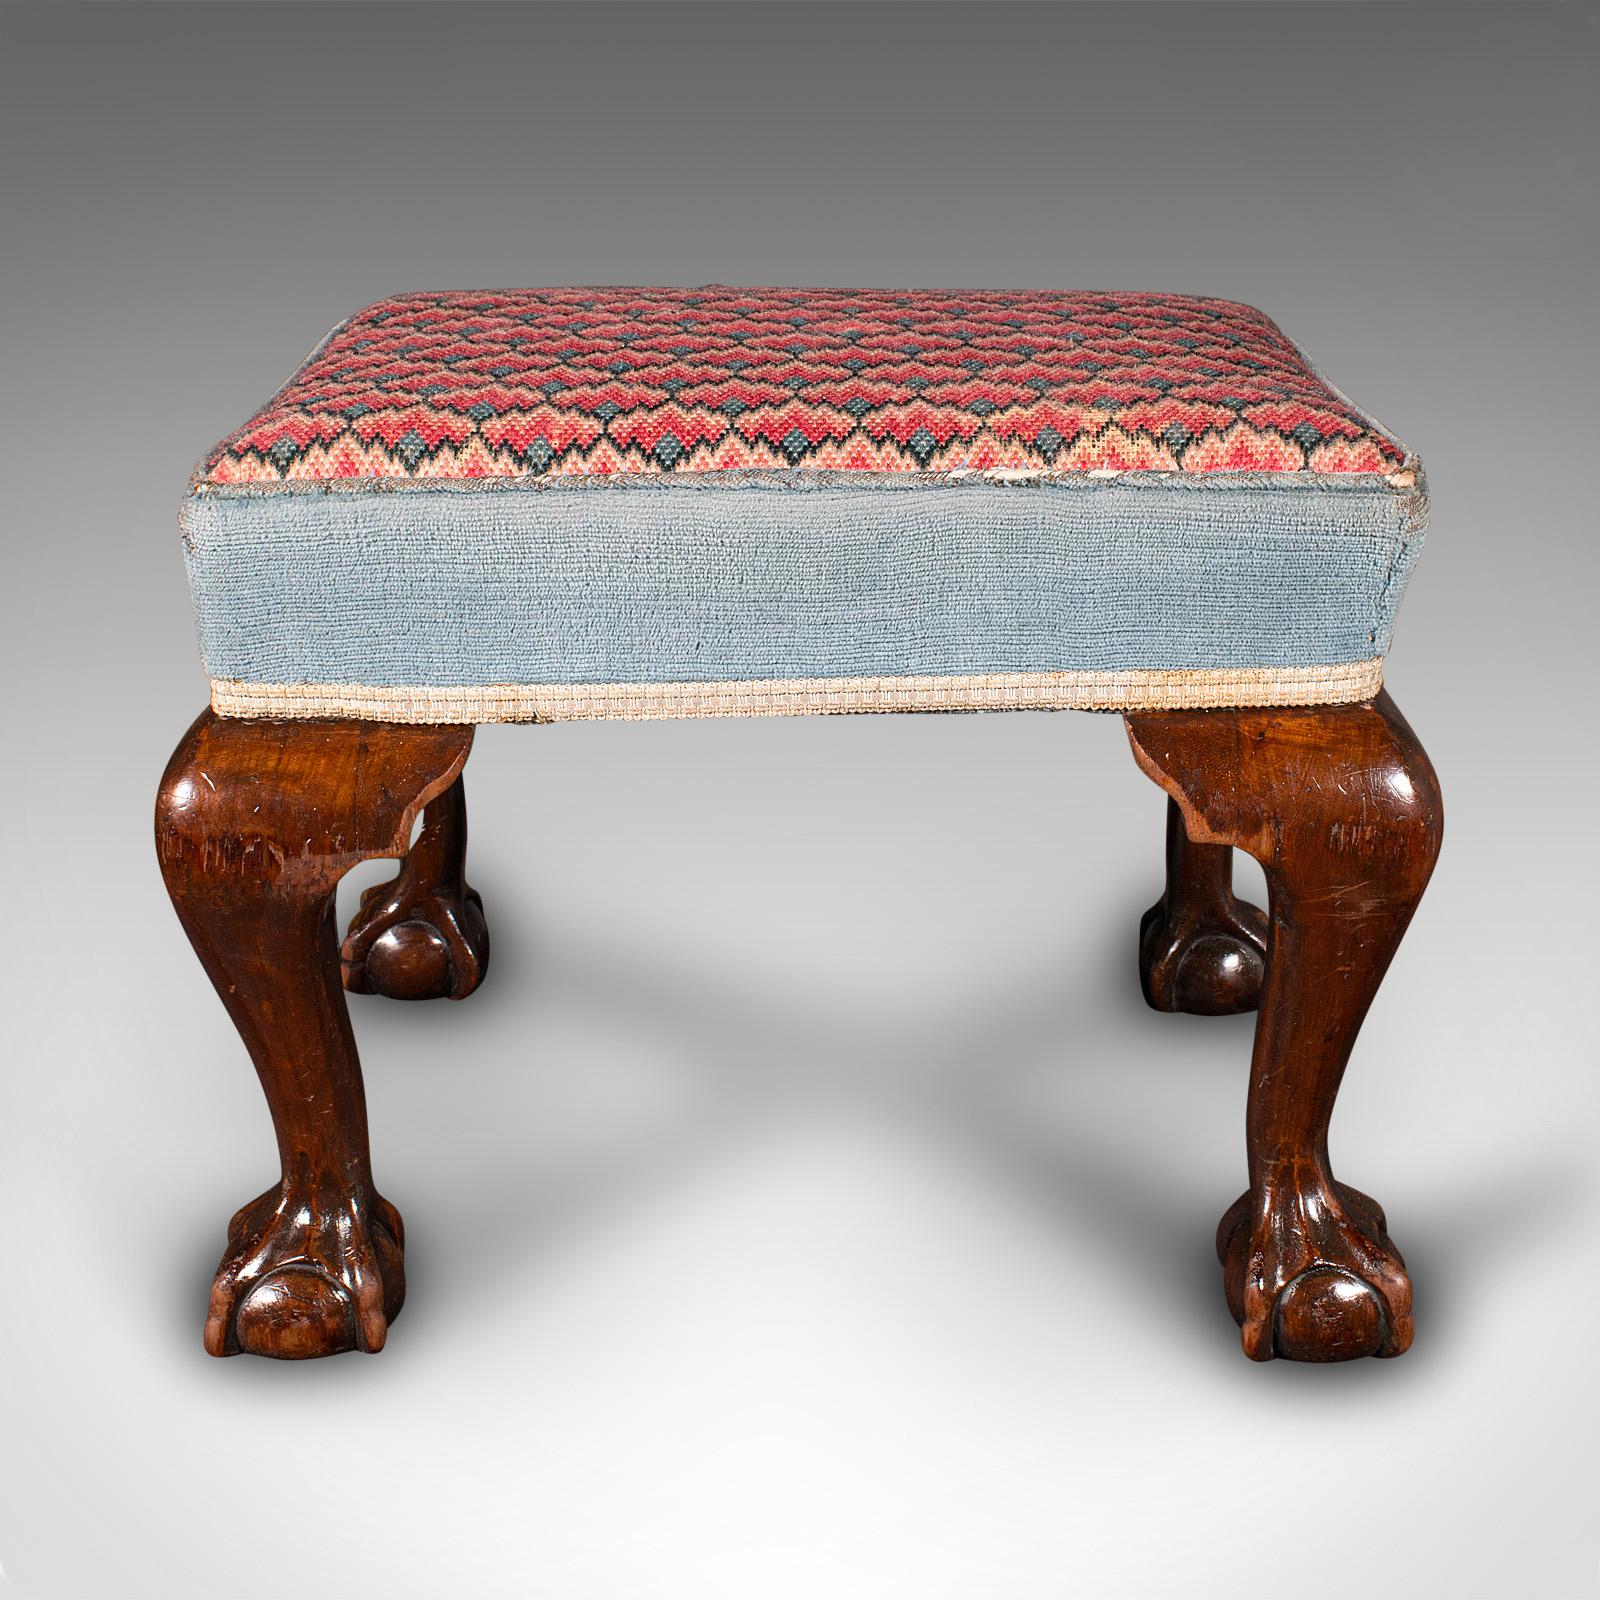 British Antique Fireside Stool, English, Needlepoint, Footstool, Early Victorian, C.1850 For Sale